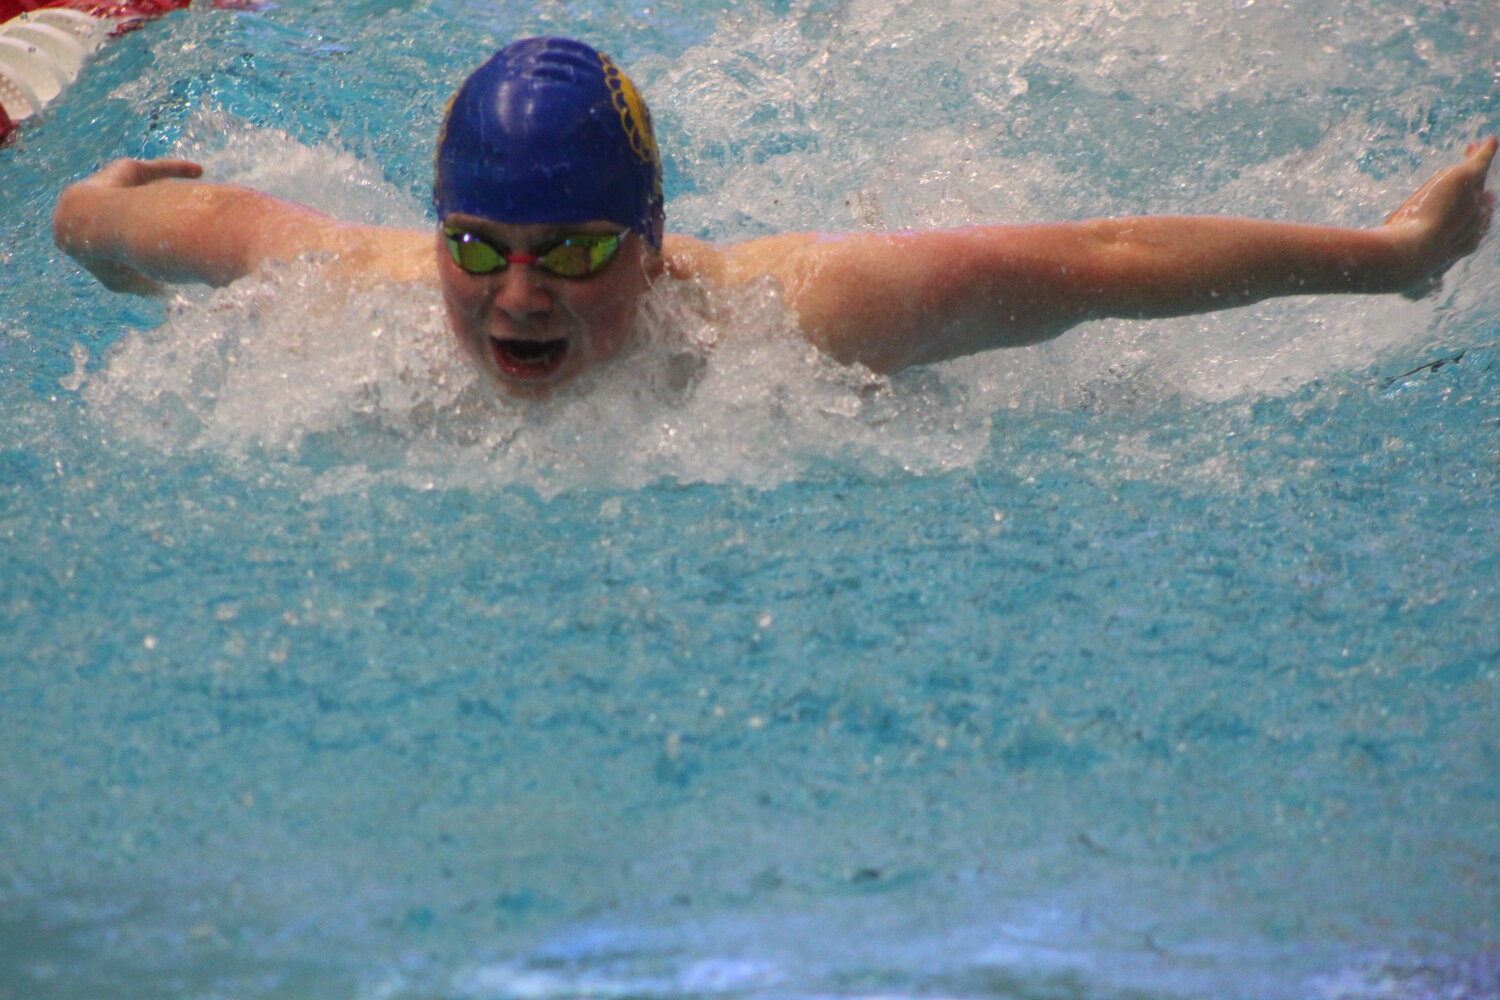 Campbell Mason also wrapped up his career and has been a versatile swimmer competing in multiple different events.